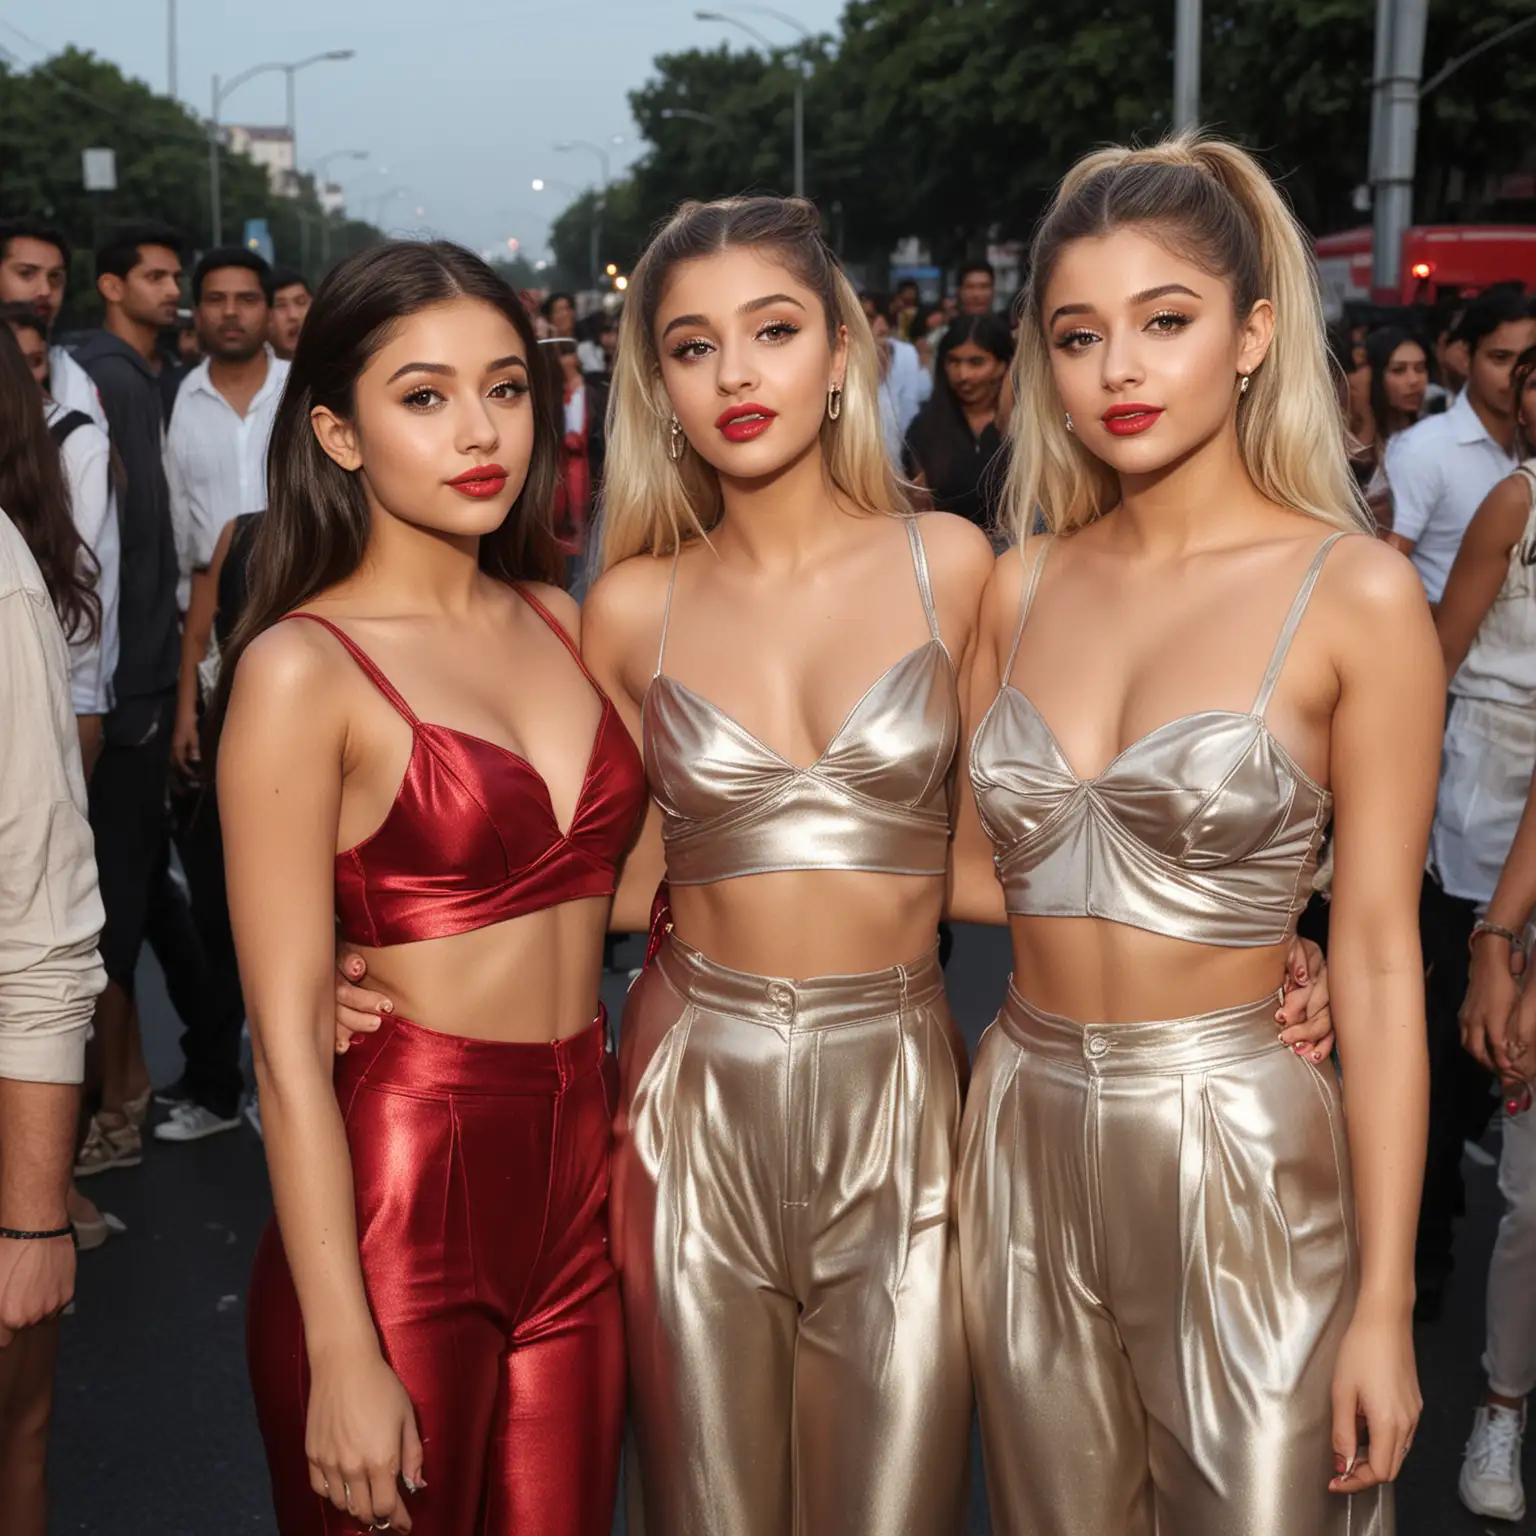 Flash photography, ISO-100 f/32 shot. Crowded Delhi road. Madison Beer, Ariana Grande and Nicola Peltz wearing only shiny slinky flowy silky chiffon satiny metallic pants, red glossy lipstick & lots of makeup and pouty lips. Kissing romantically while the everyone ogles at them.